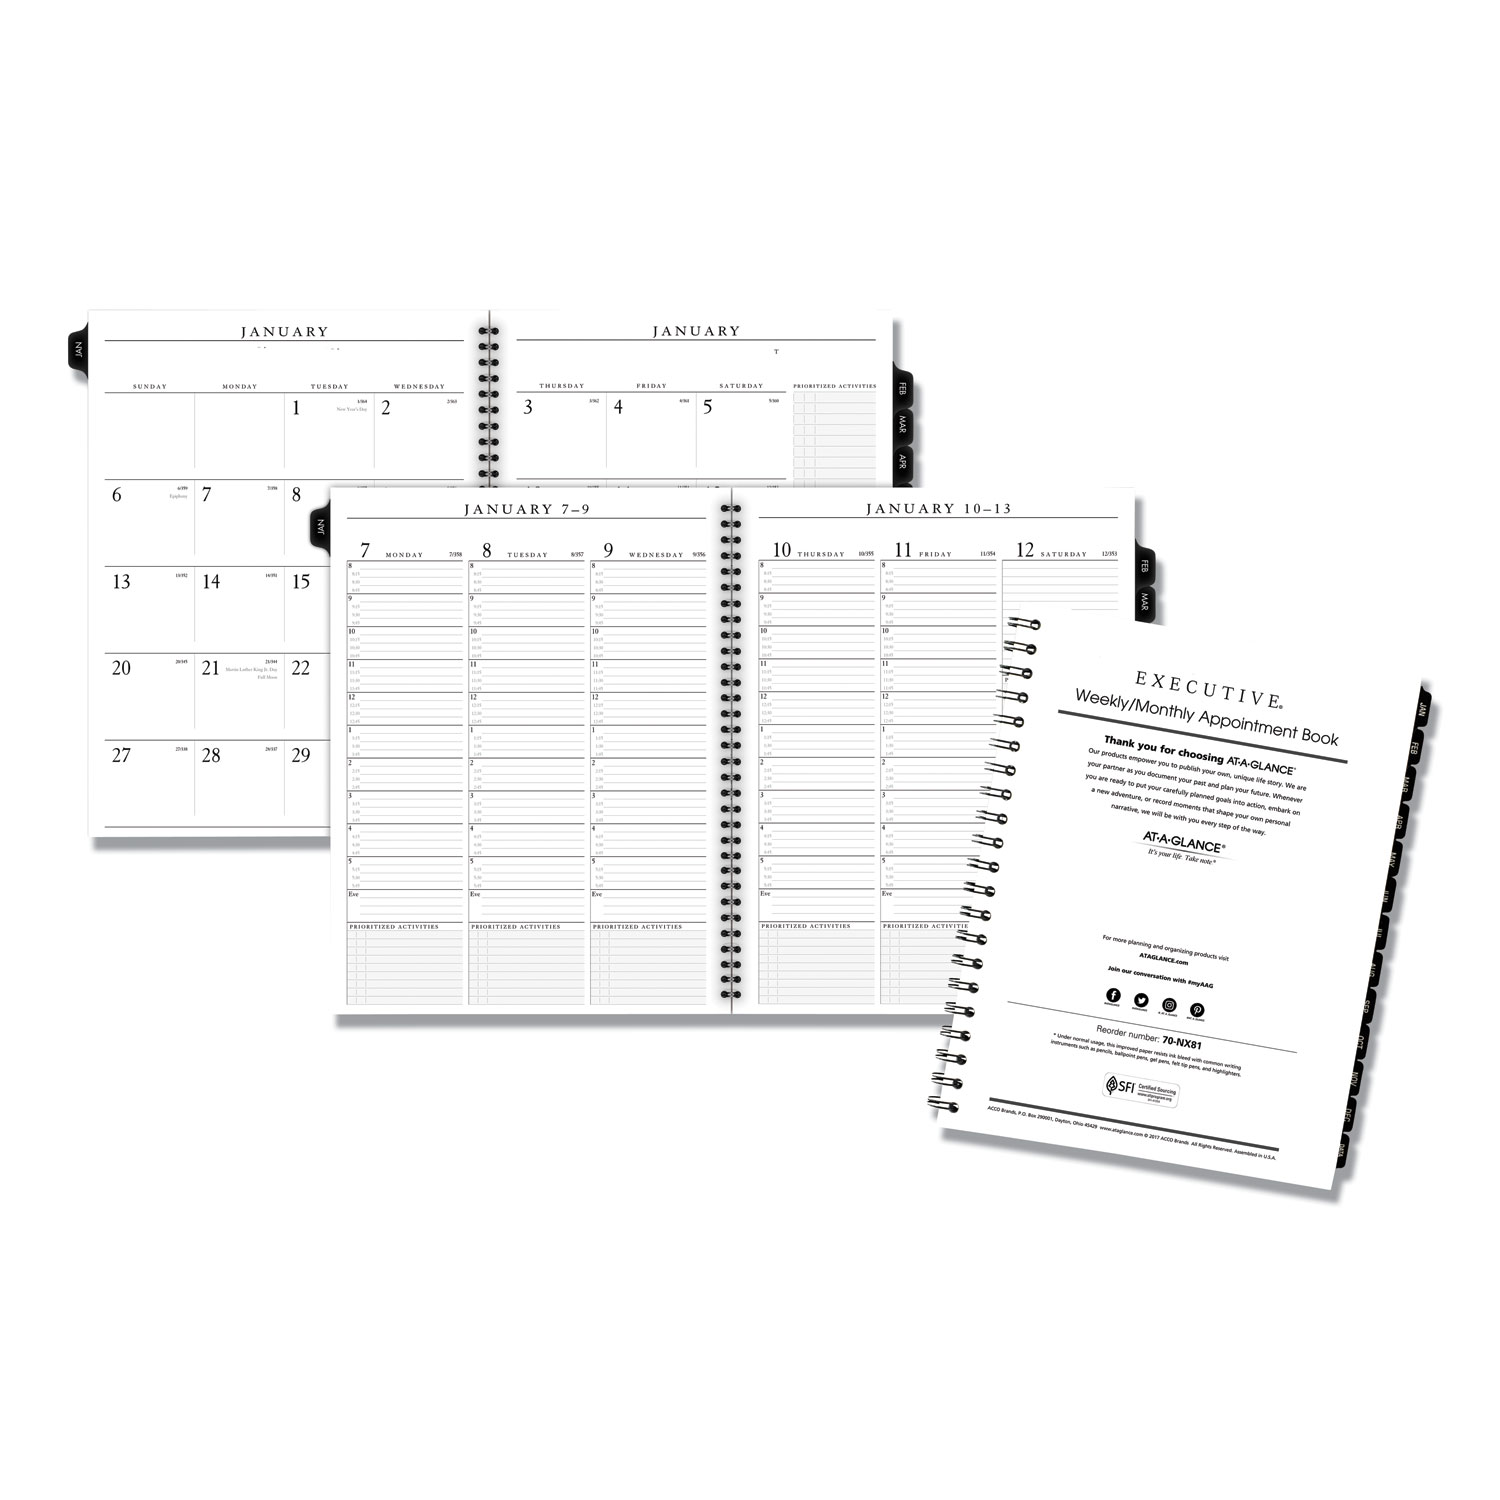 Executive Weekly/Monthly Planner Refill, 15-Minute, 10 7/8 x 8 1/4, 2020